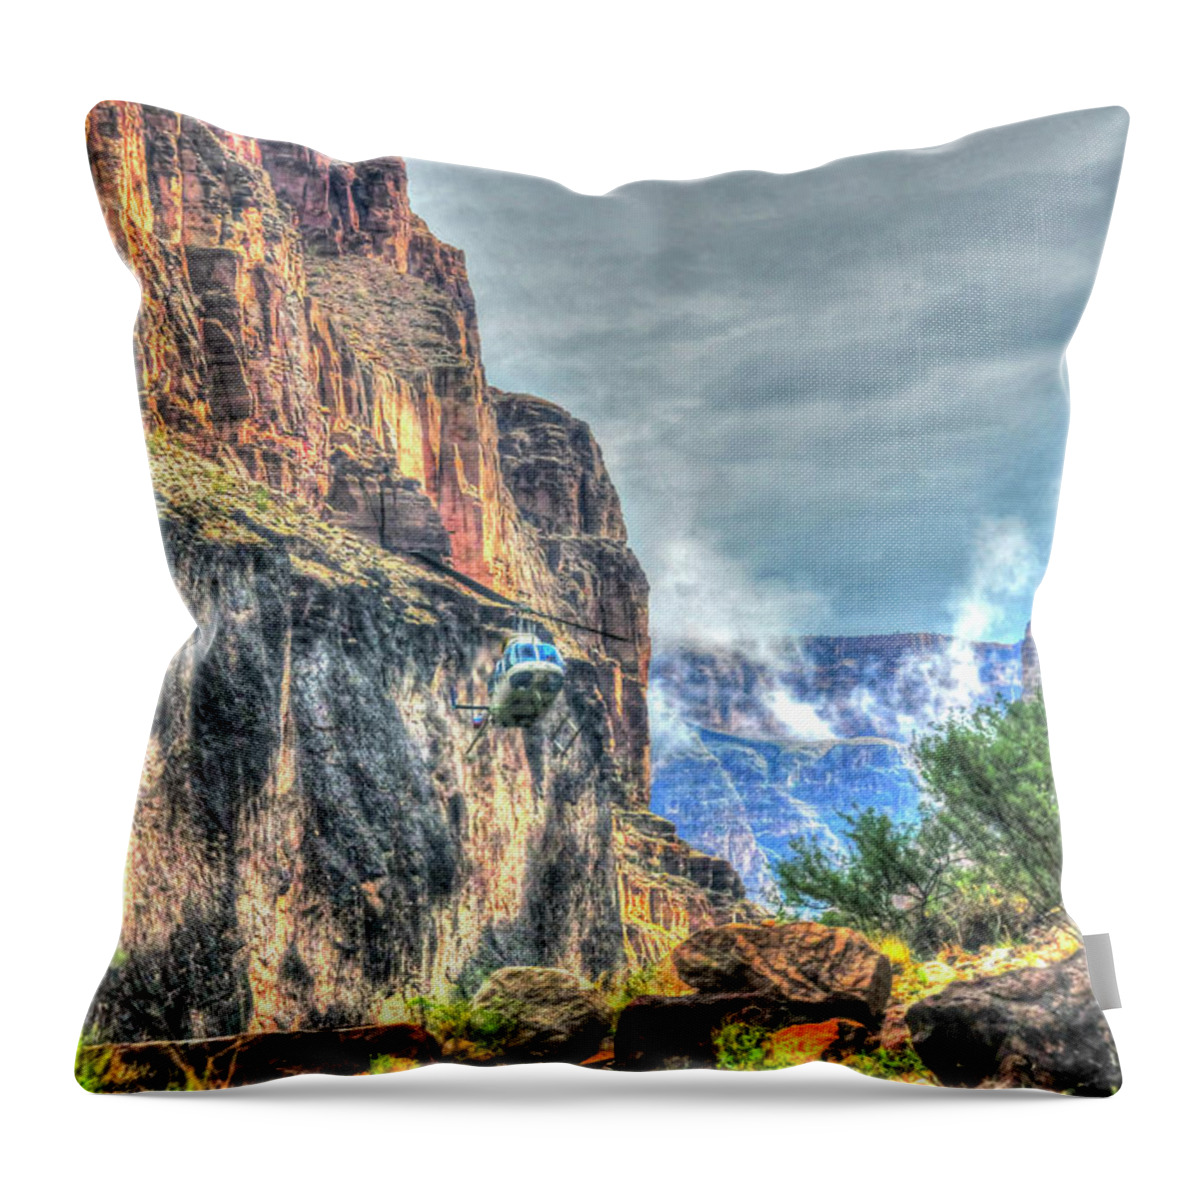 Bar 10 Ranch Throw Pillow featuring the photograph Approaching LZ Colorado by Don Mercer